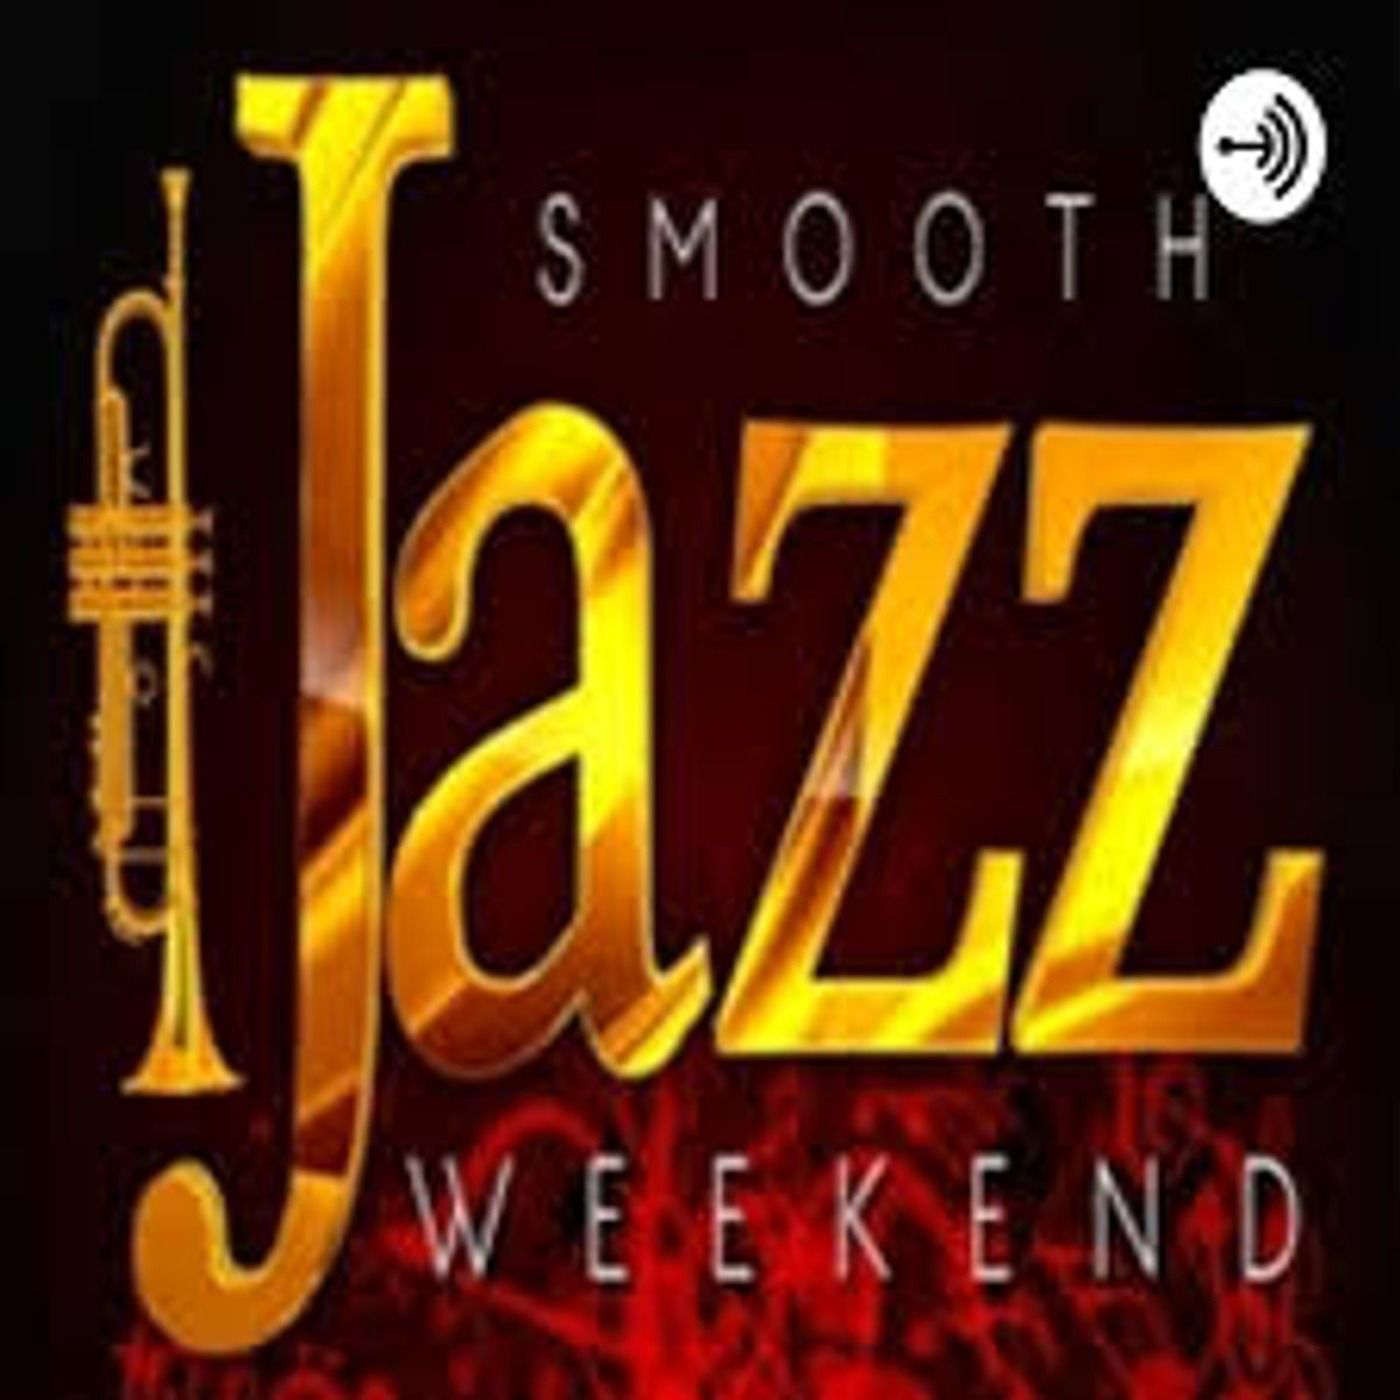 A highlight from Smooth Jazz Weekend with Tina E. (Feeling You)